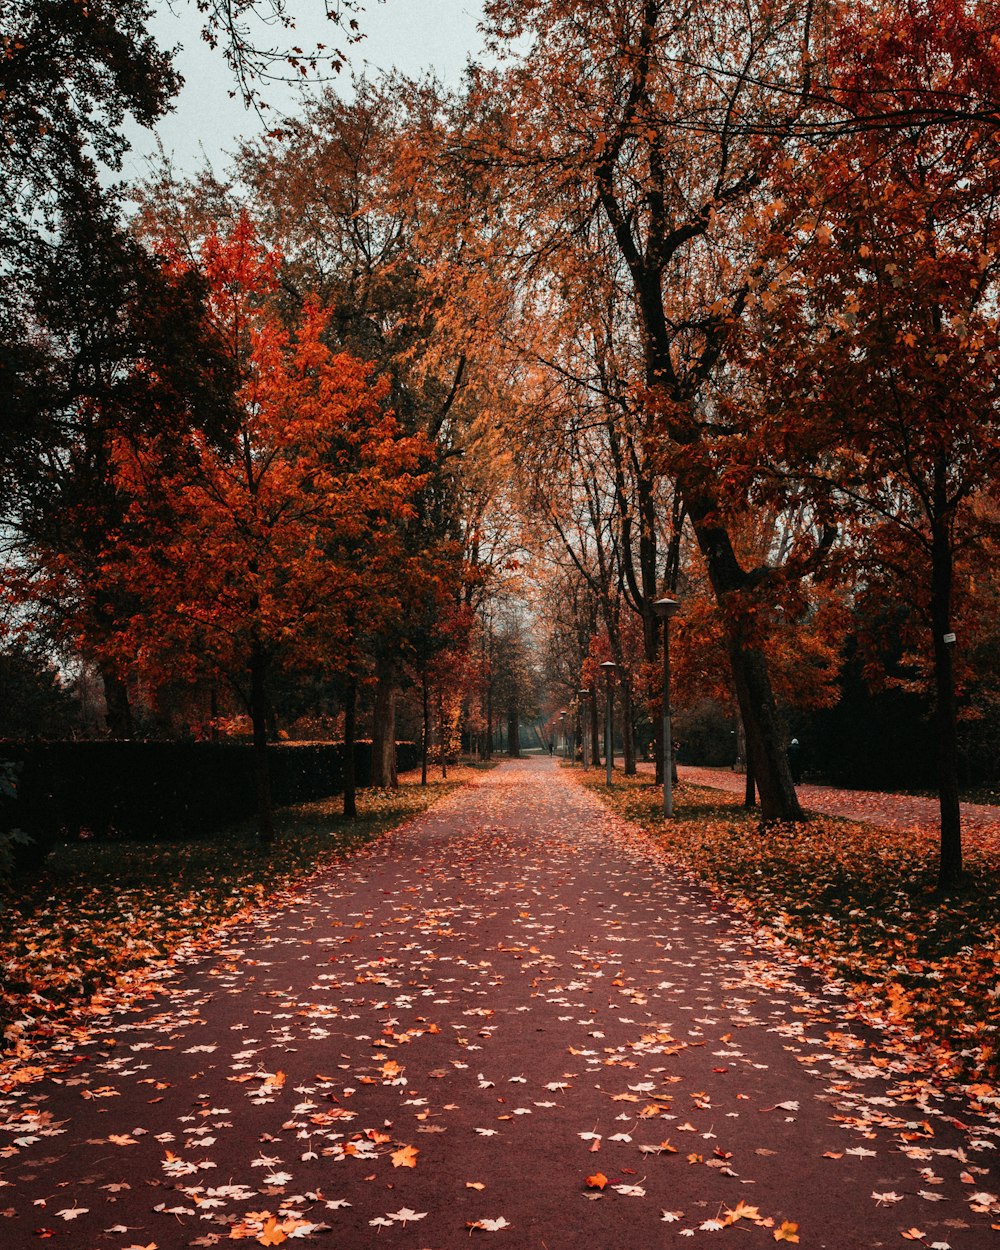 a pathway in a park with lots of leaves on the ground